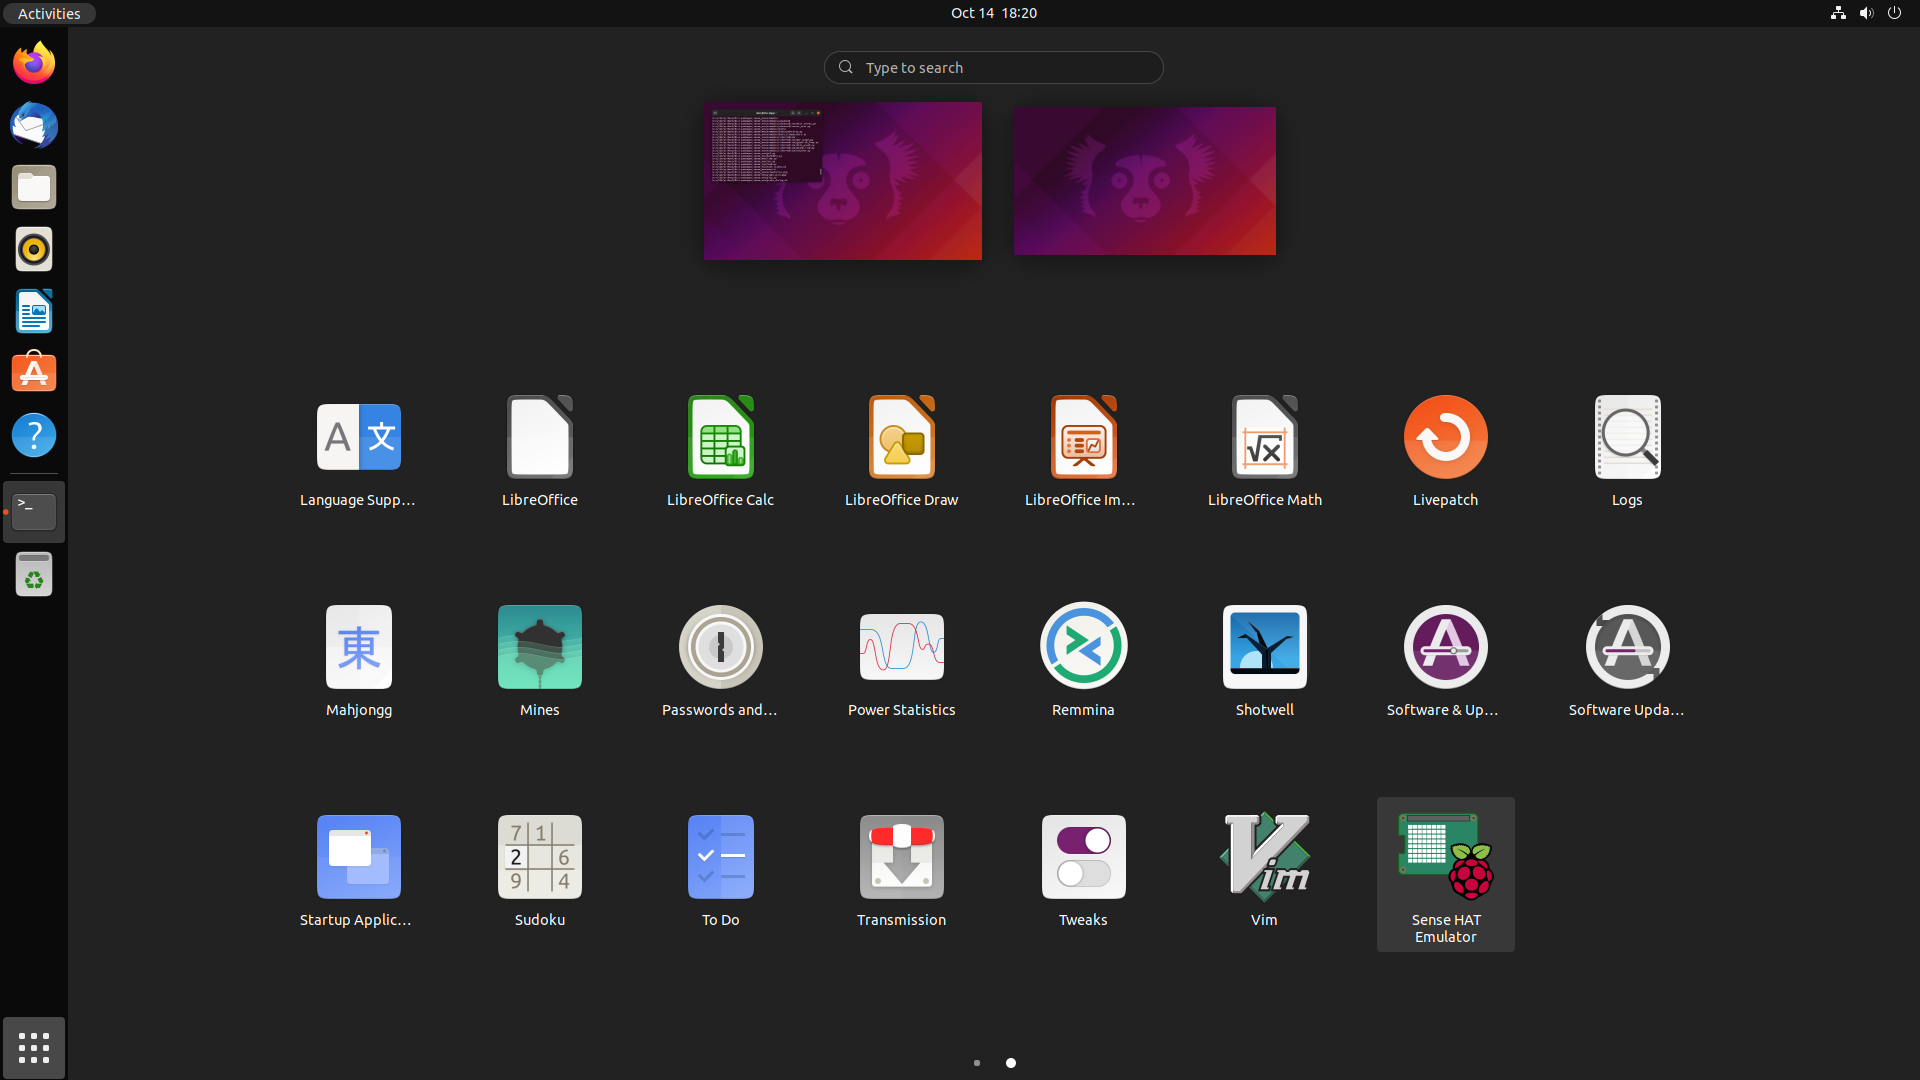 Selecting the Sense HAT Emulator icon from the Gnome applications menu